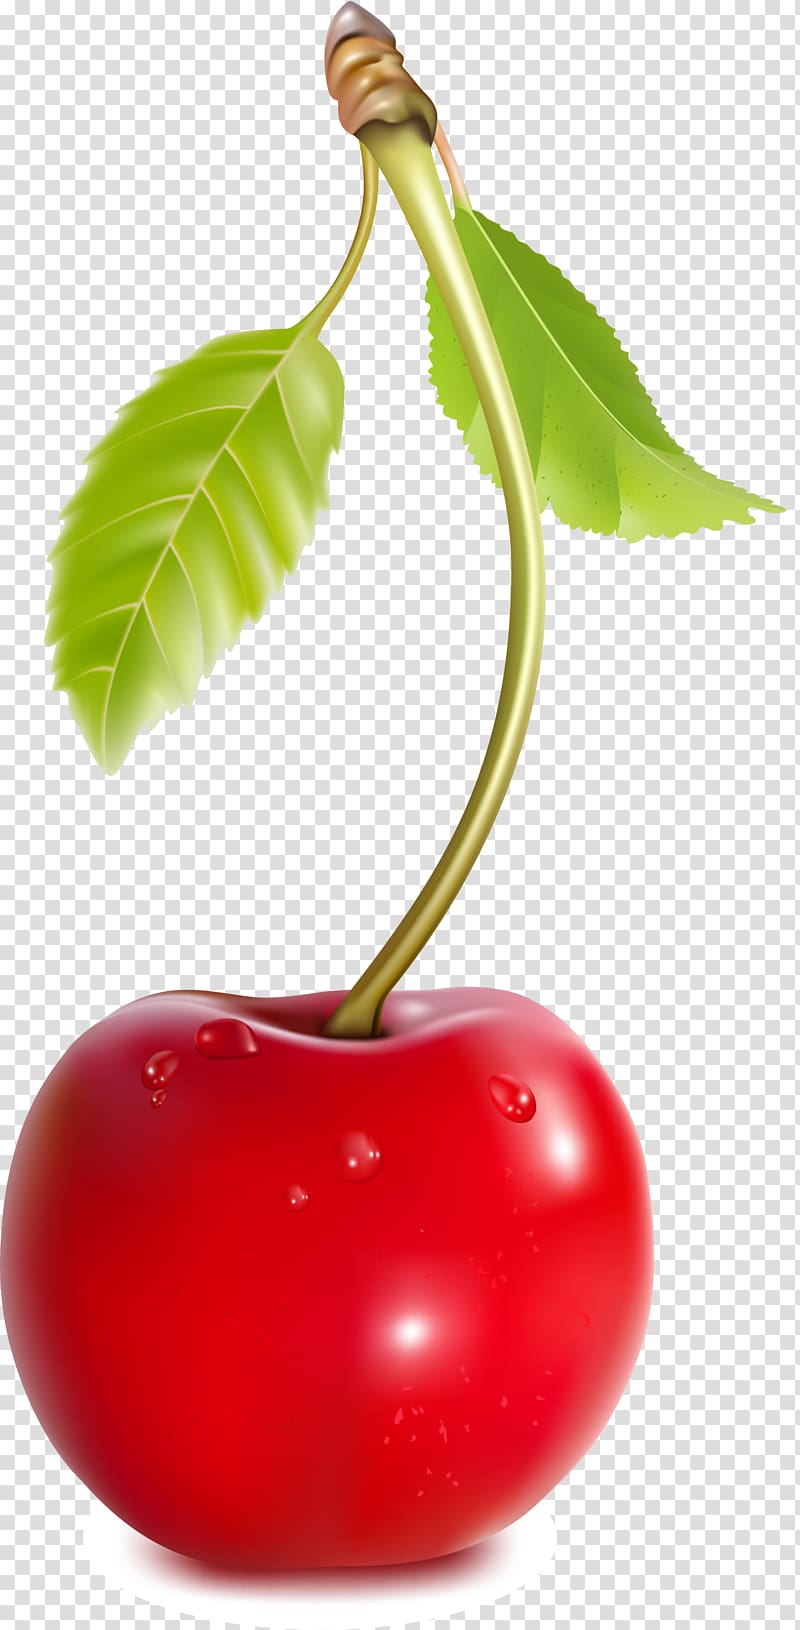 Coca-Cola Cherry Fruit, Green cherry transparent background PNG clipart